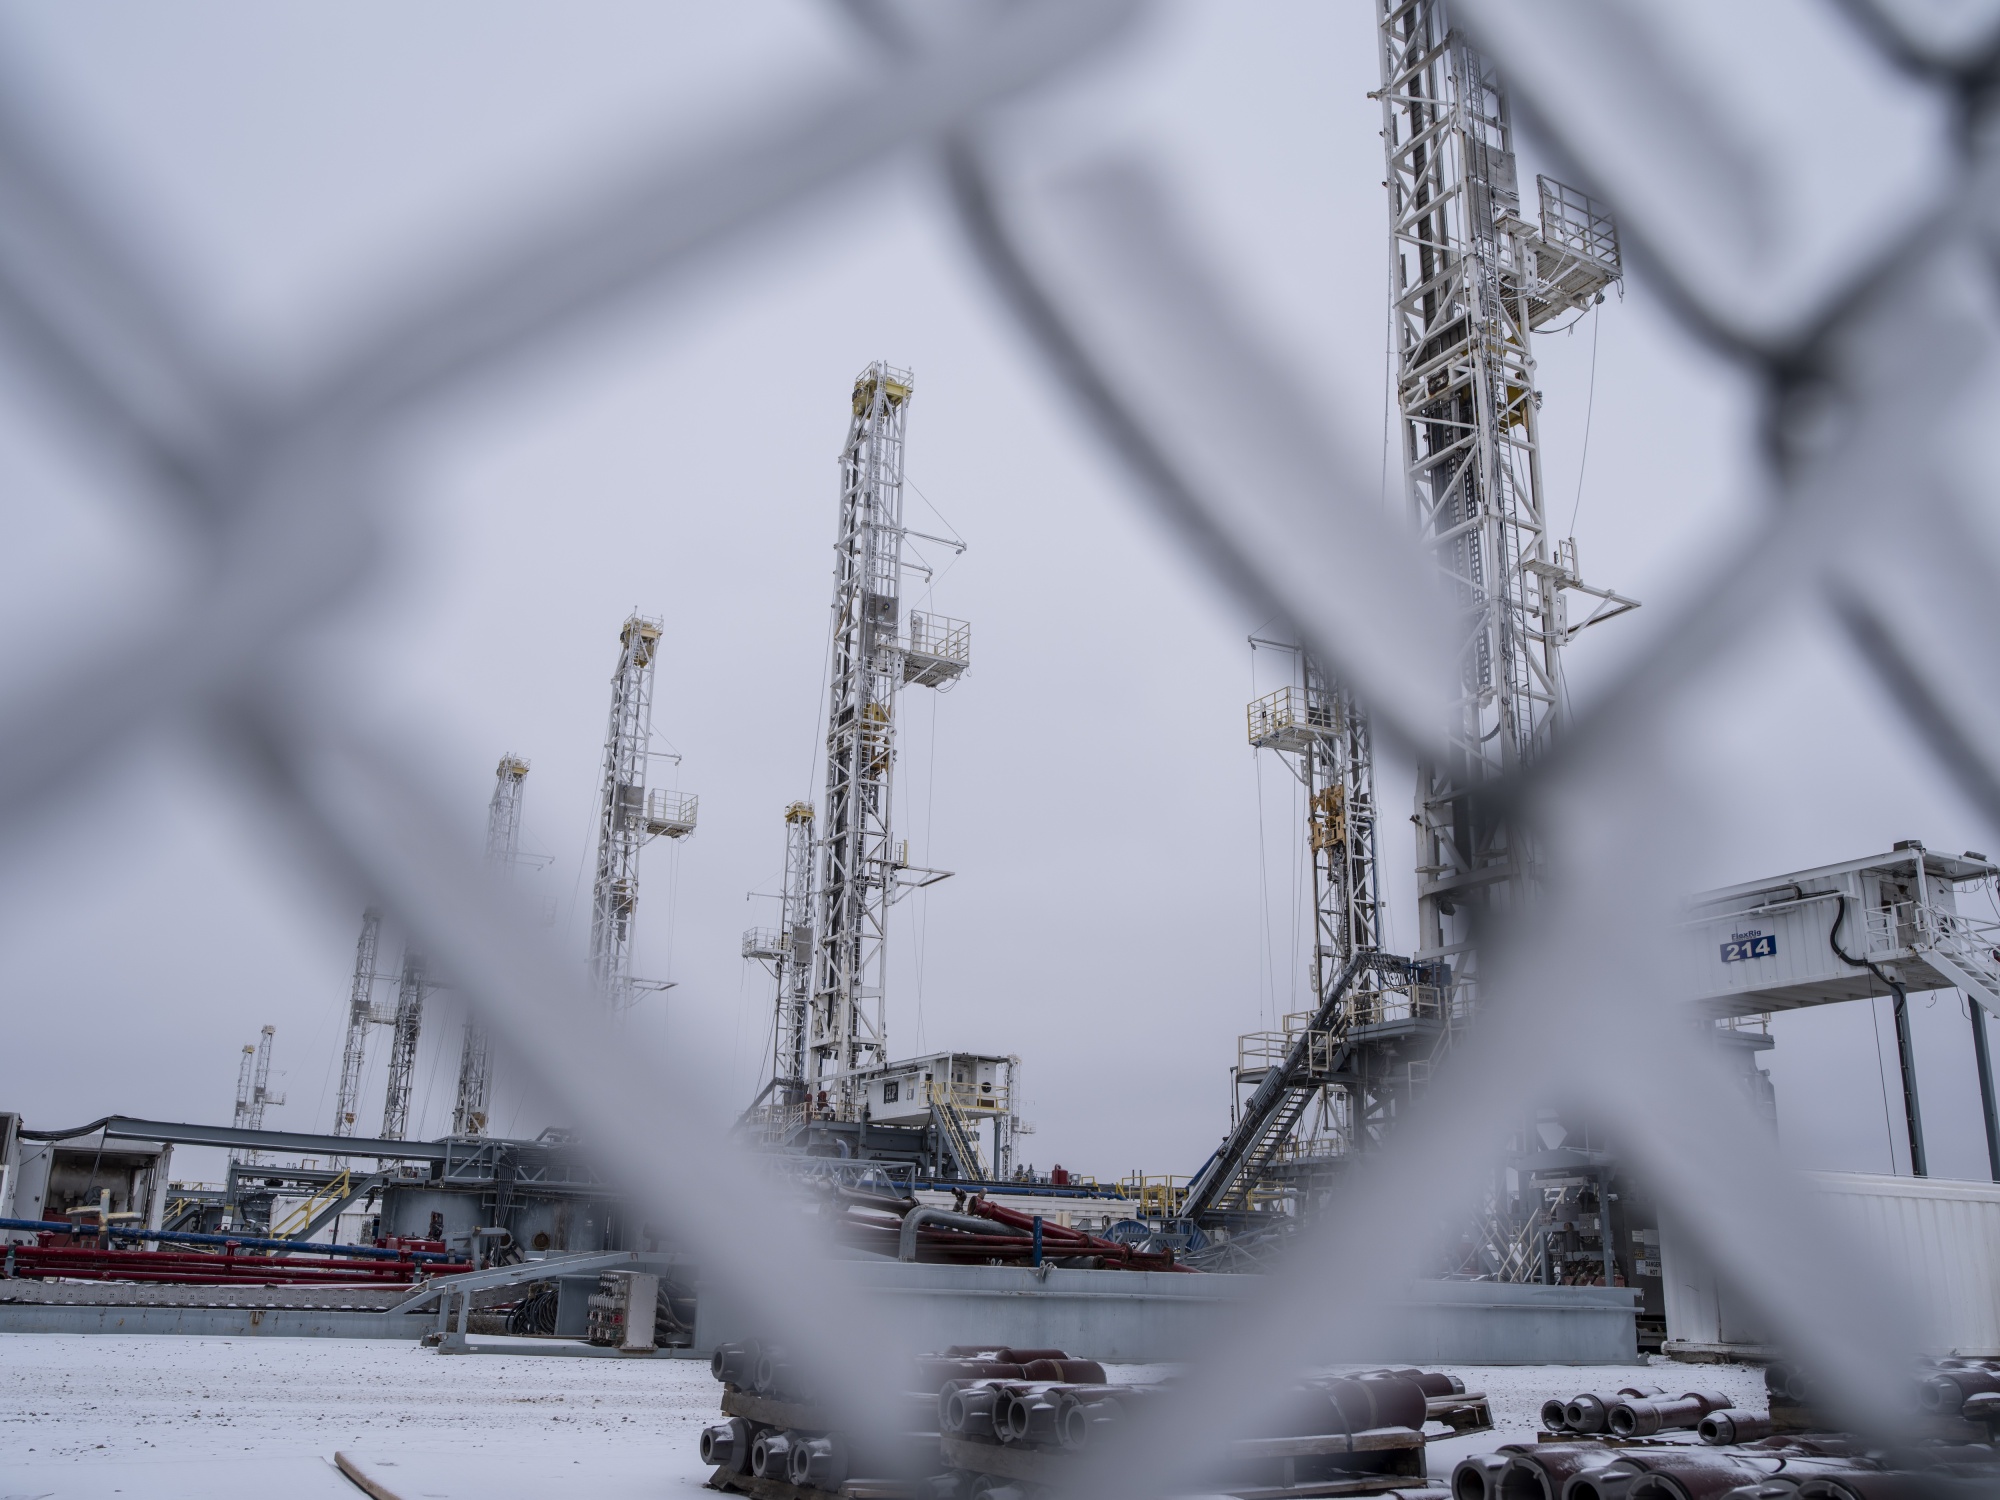 Idle oil drilling rigs in the snow&nbsp;near Midland, Texas, in 2021.&nbsp;